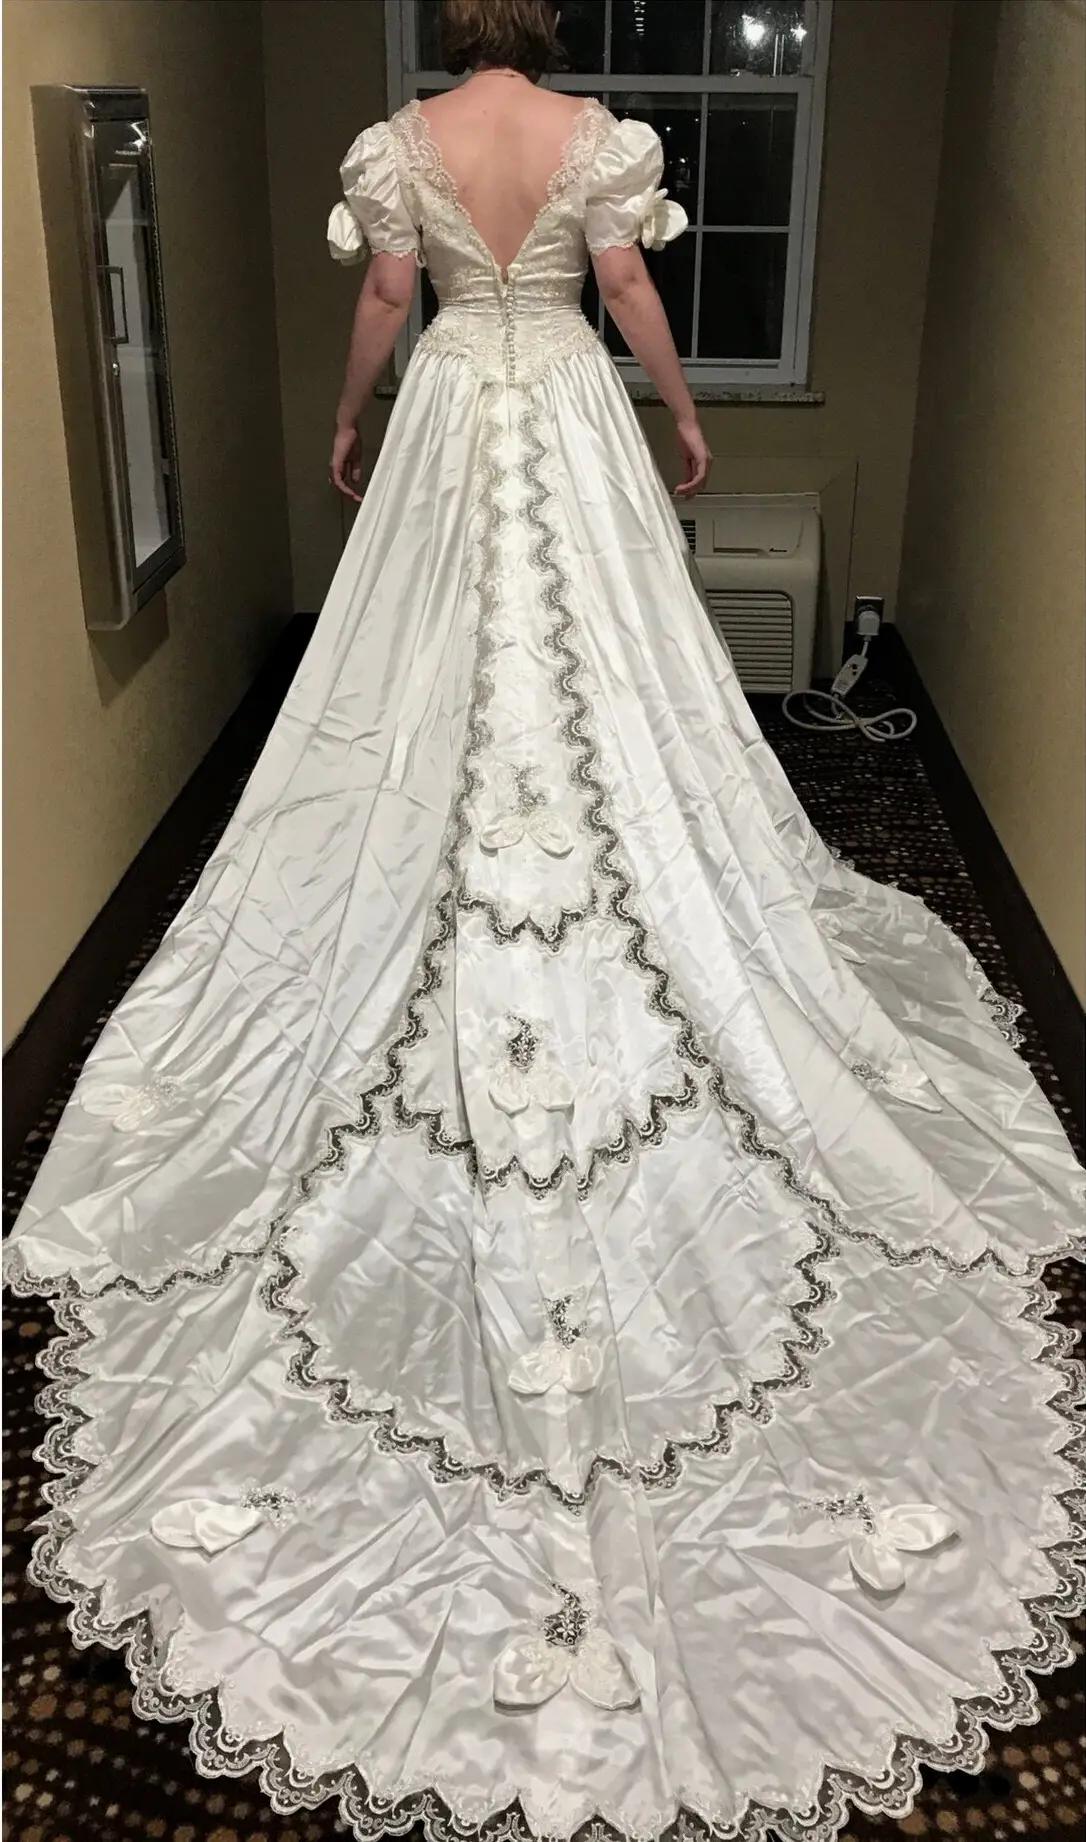 Bridal Gown 1990s